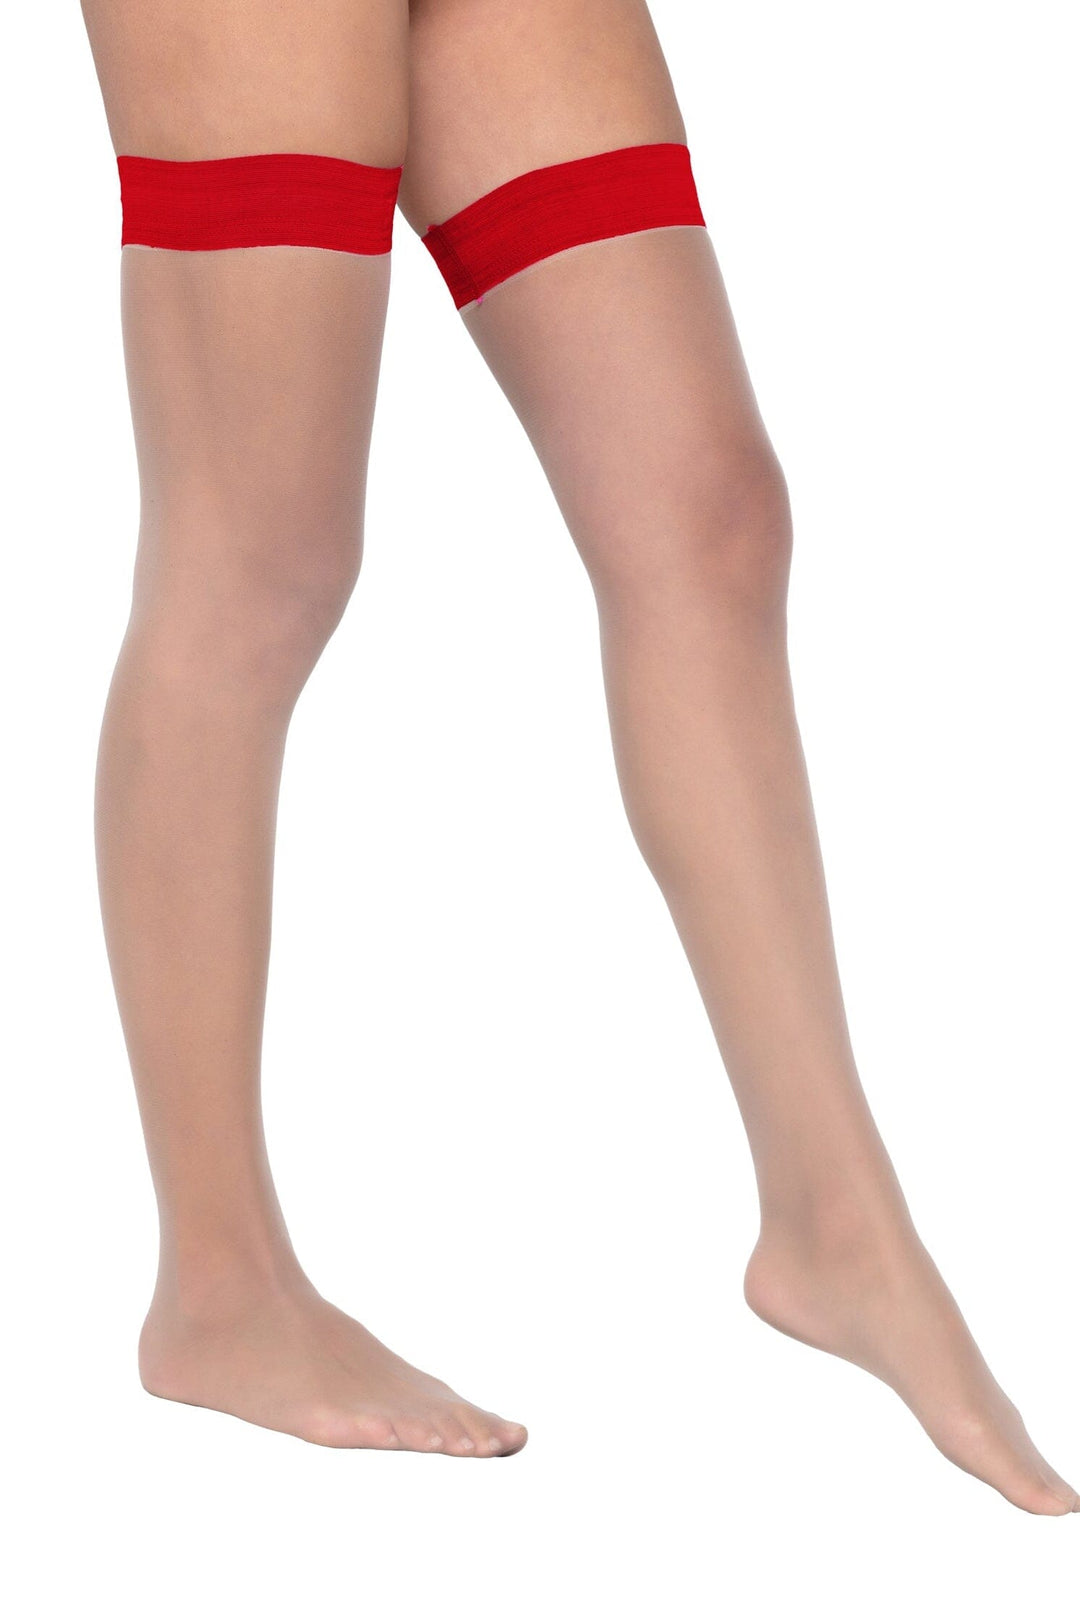 Colored Stay up Stockings-Thigh High Stockings-Roma Confidential-Red-O/S-SEXYSHOES.COM